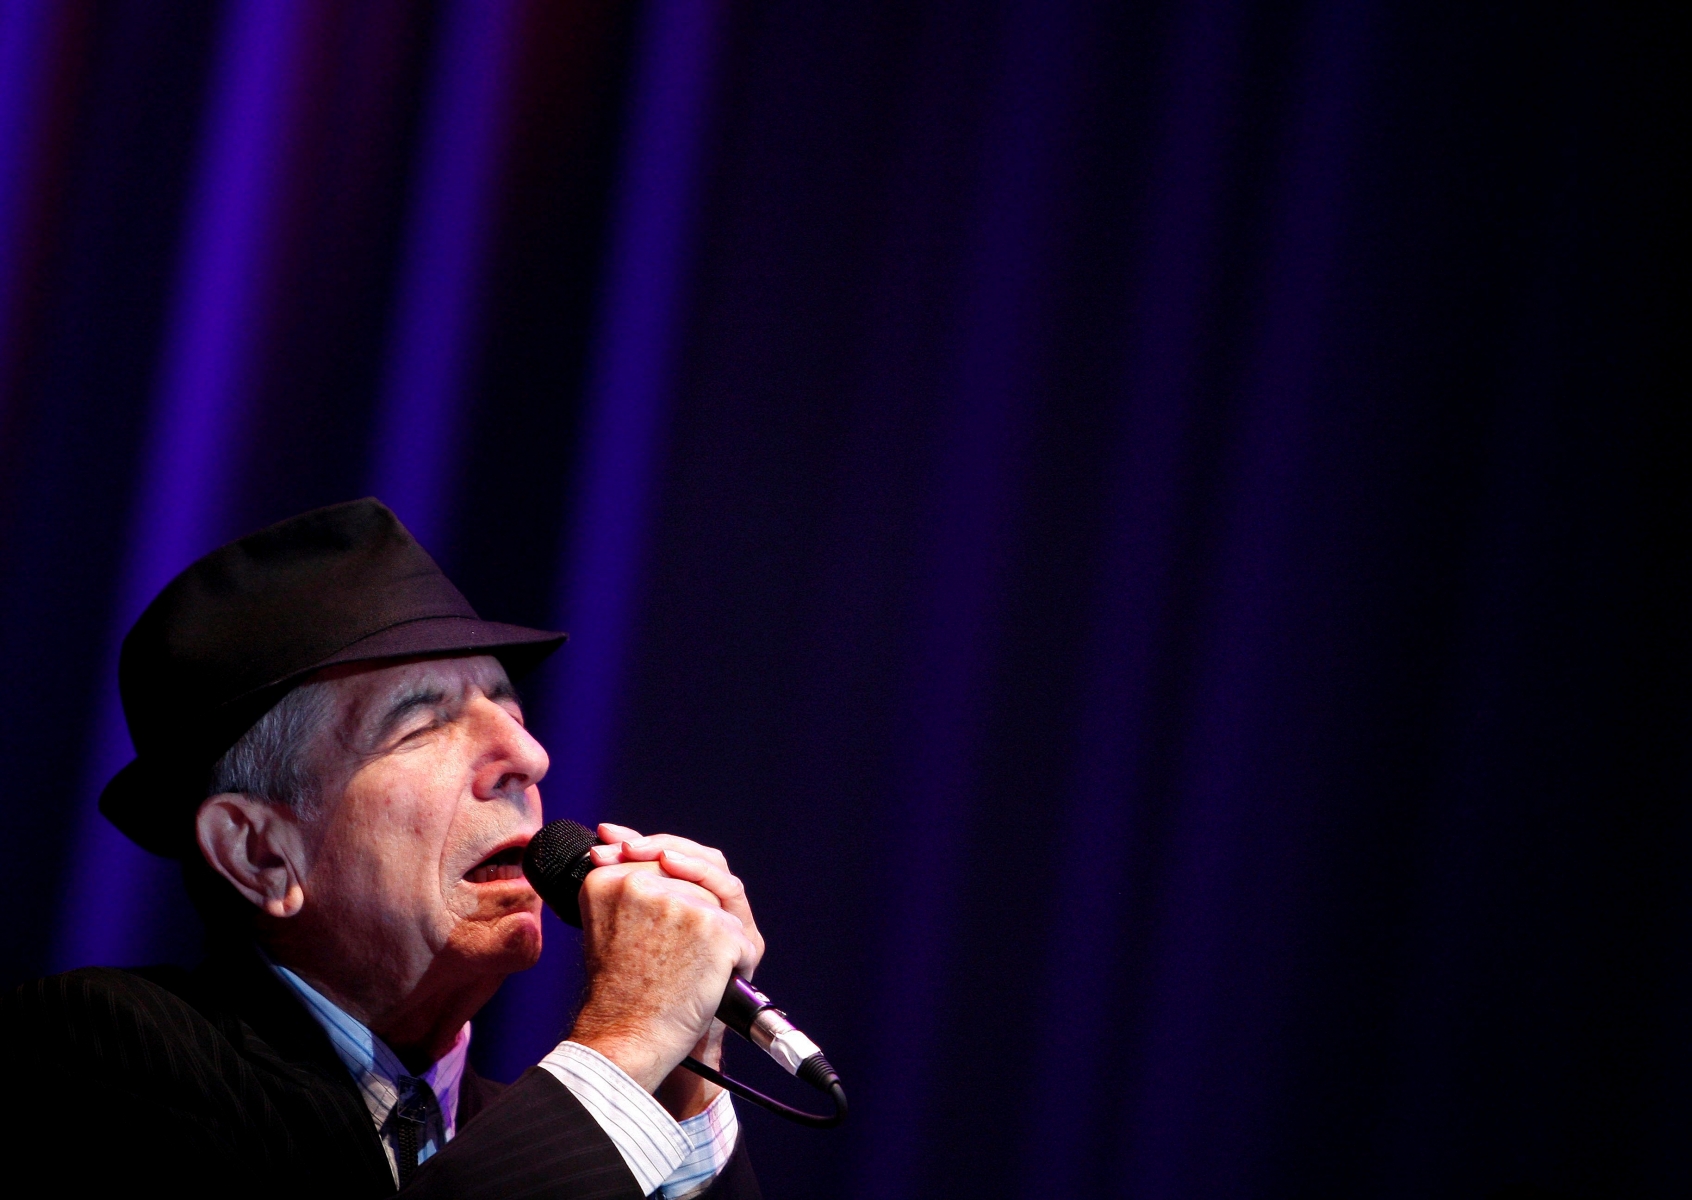 epa05626119 (FILE) A file picture dated 19 July 2008. shows Canadian singer Leonard Cohen performing during a concert in Lisbon, Portugal. Leonard Cohen has died aged 82 on 10 November 2016.  EPA/TIAGO PETINGA FILE PORTUGAL LEONARD COHEN OBIT